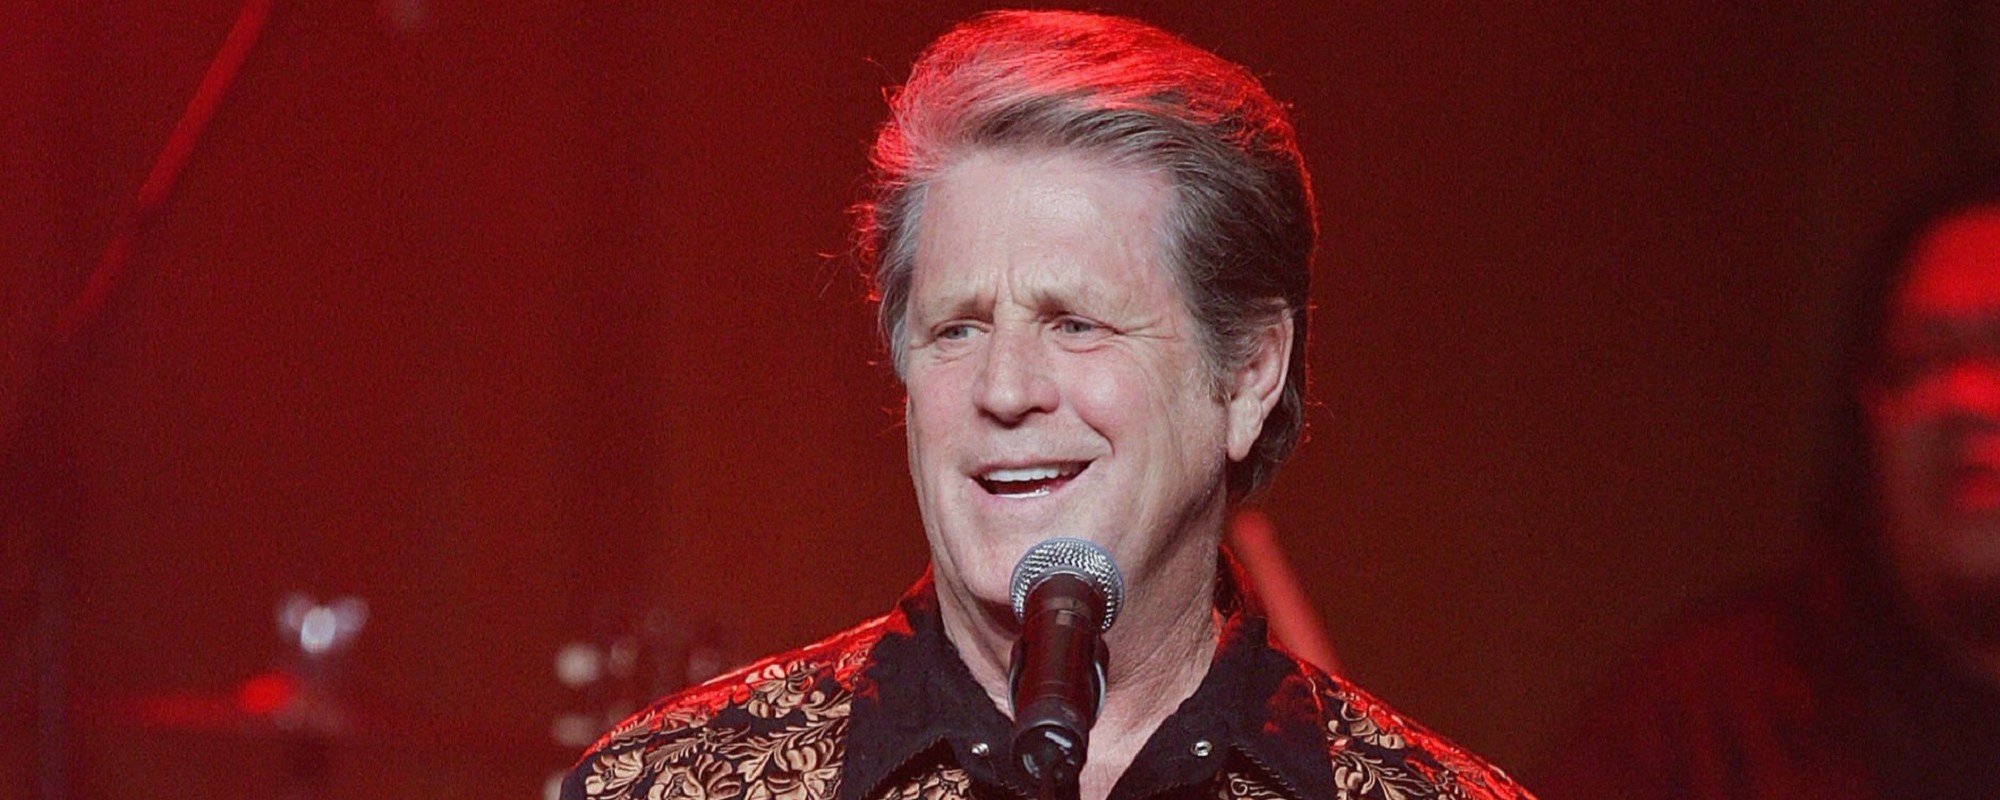 Fellow Beach Boys Members, Other Stars Send Out Birthday Wishes to Brian Wilson